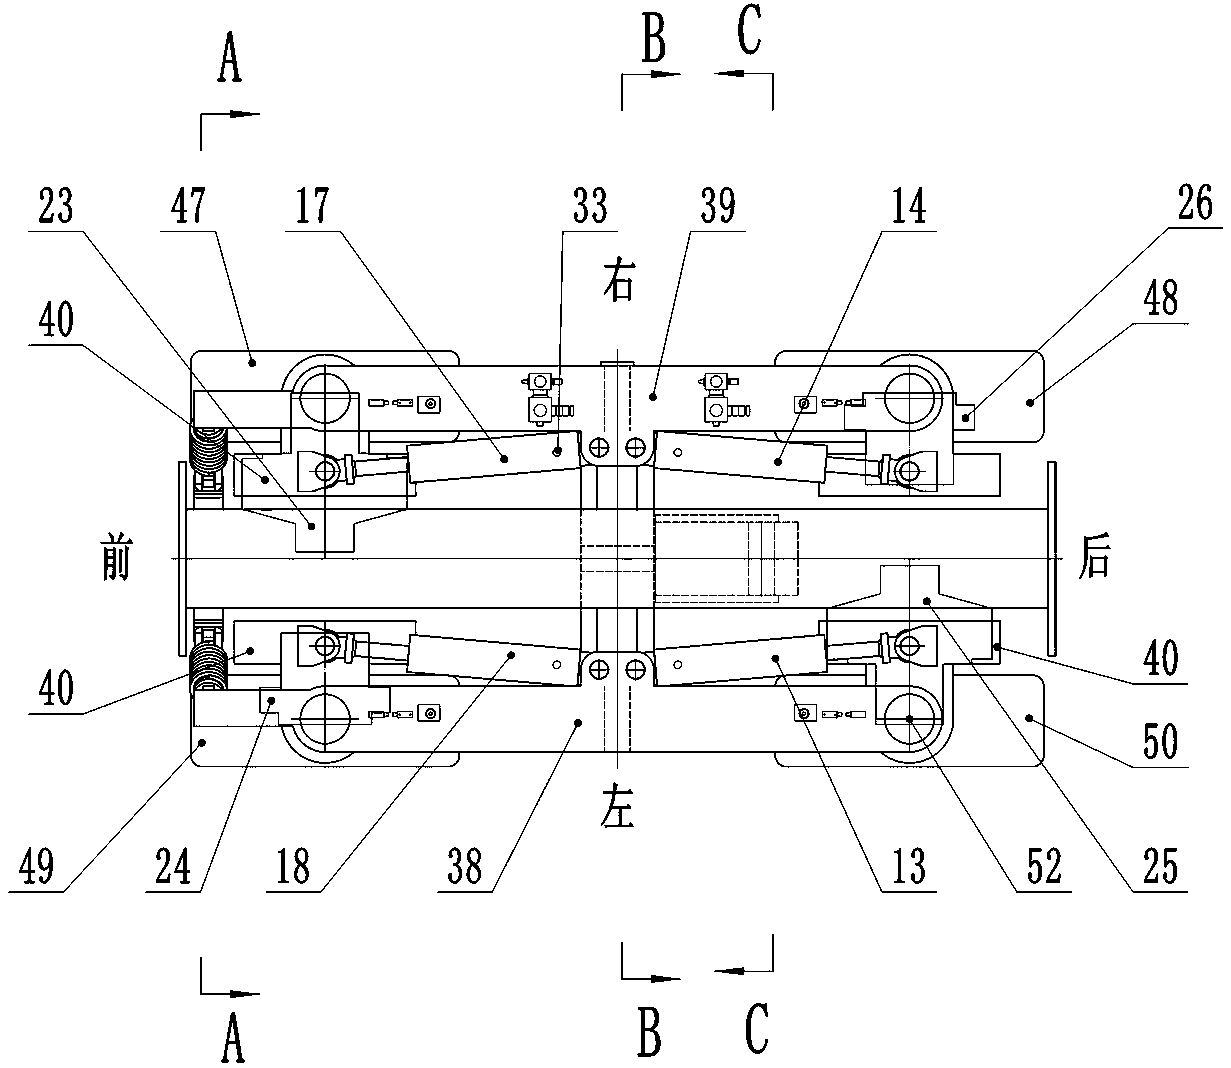 Narrow mine trackless vehicle power bogie and walking steering control system